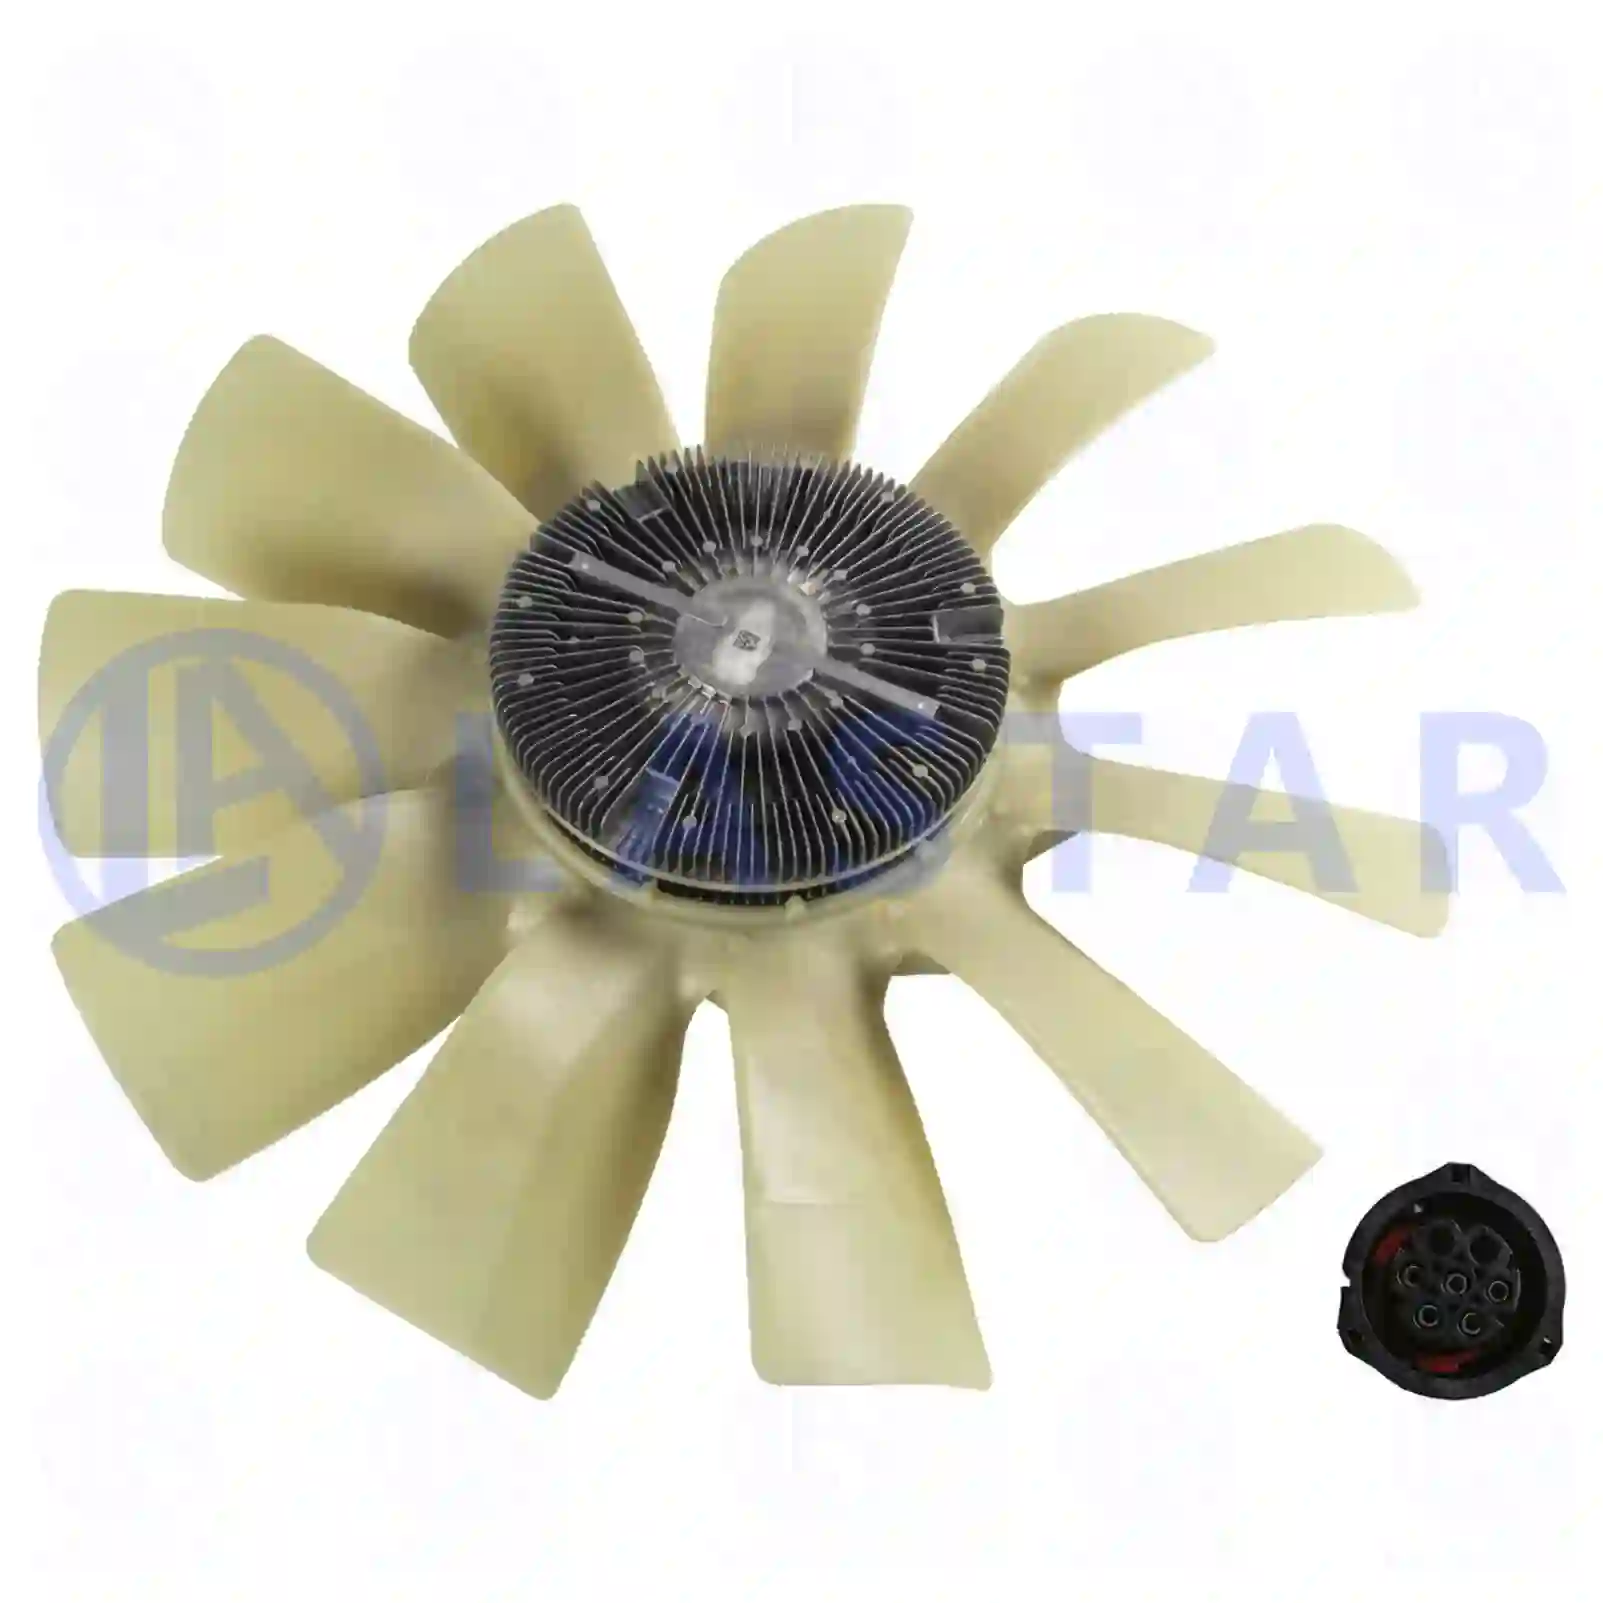 Fan with clutch, 77709090, 20765593, 21382371, 85003294 ||  77709090 Lastar Spare Part | Truck Spare Parts, Auotomotive Spare Parts Fan with clutch, 77709090, 20765593, 21382371, 85003294 ||  77709090 Lastar Spare Part | Truck Spare Parts, Auotomotive Spare Parts